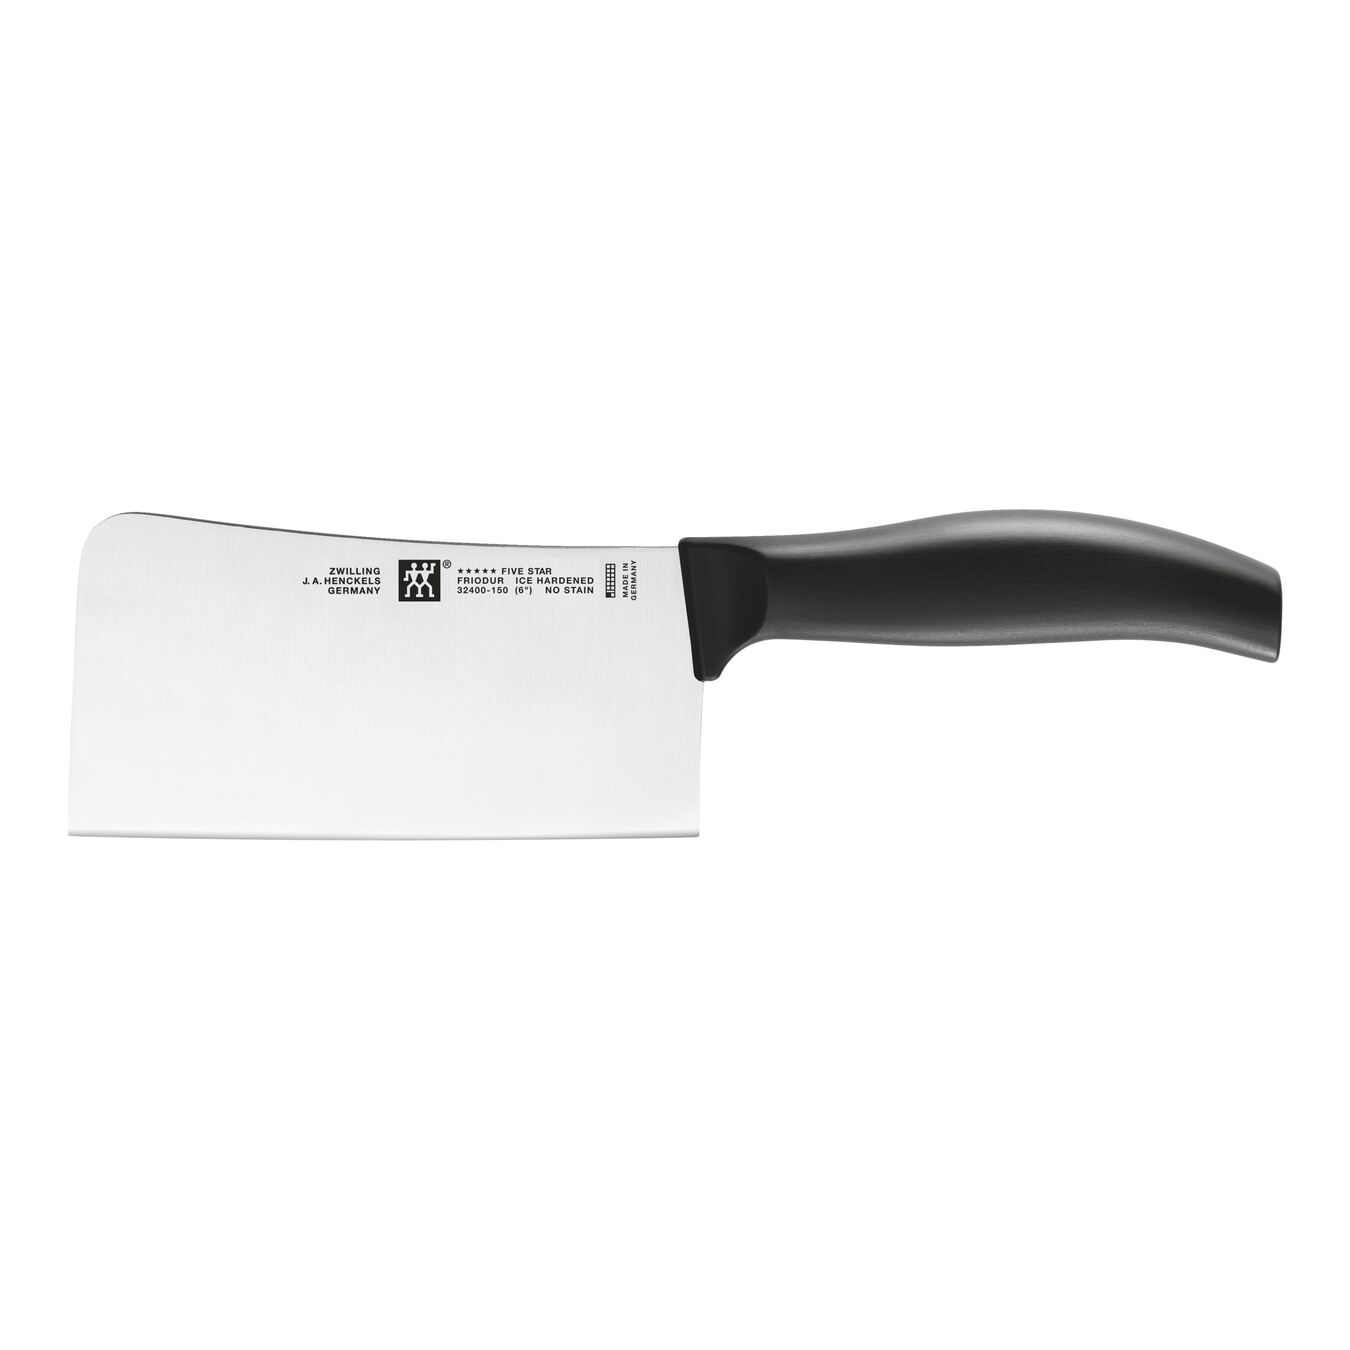 6-inch, Chinese Chef’s Knife/Vegetable Cleaver,,large 1